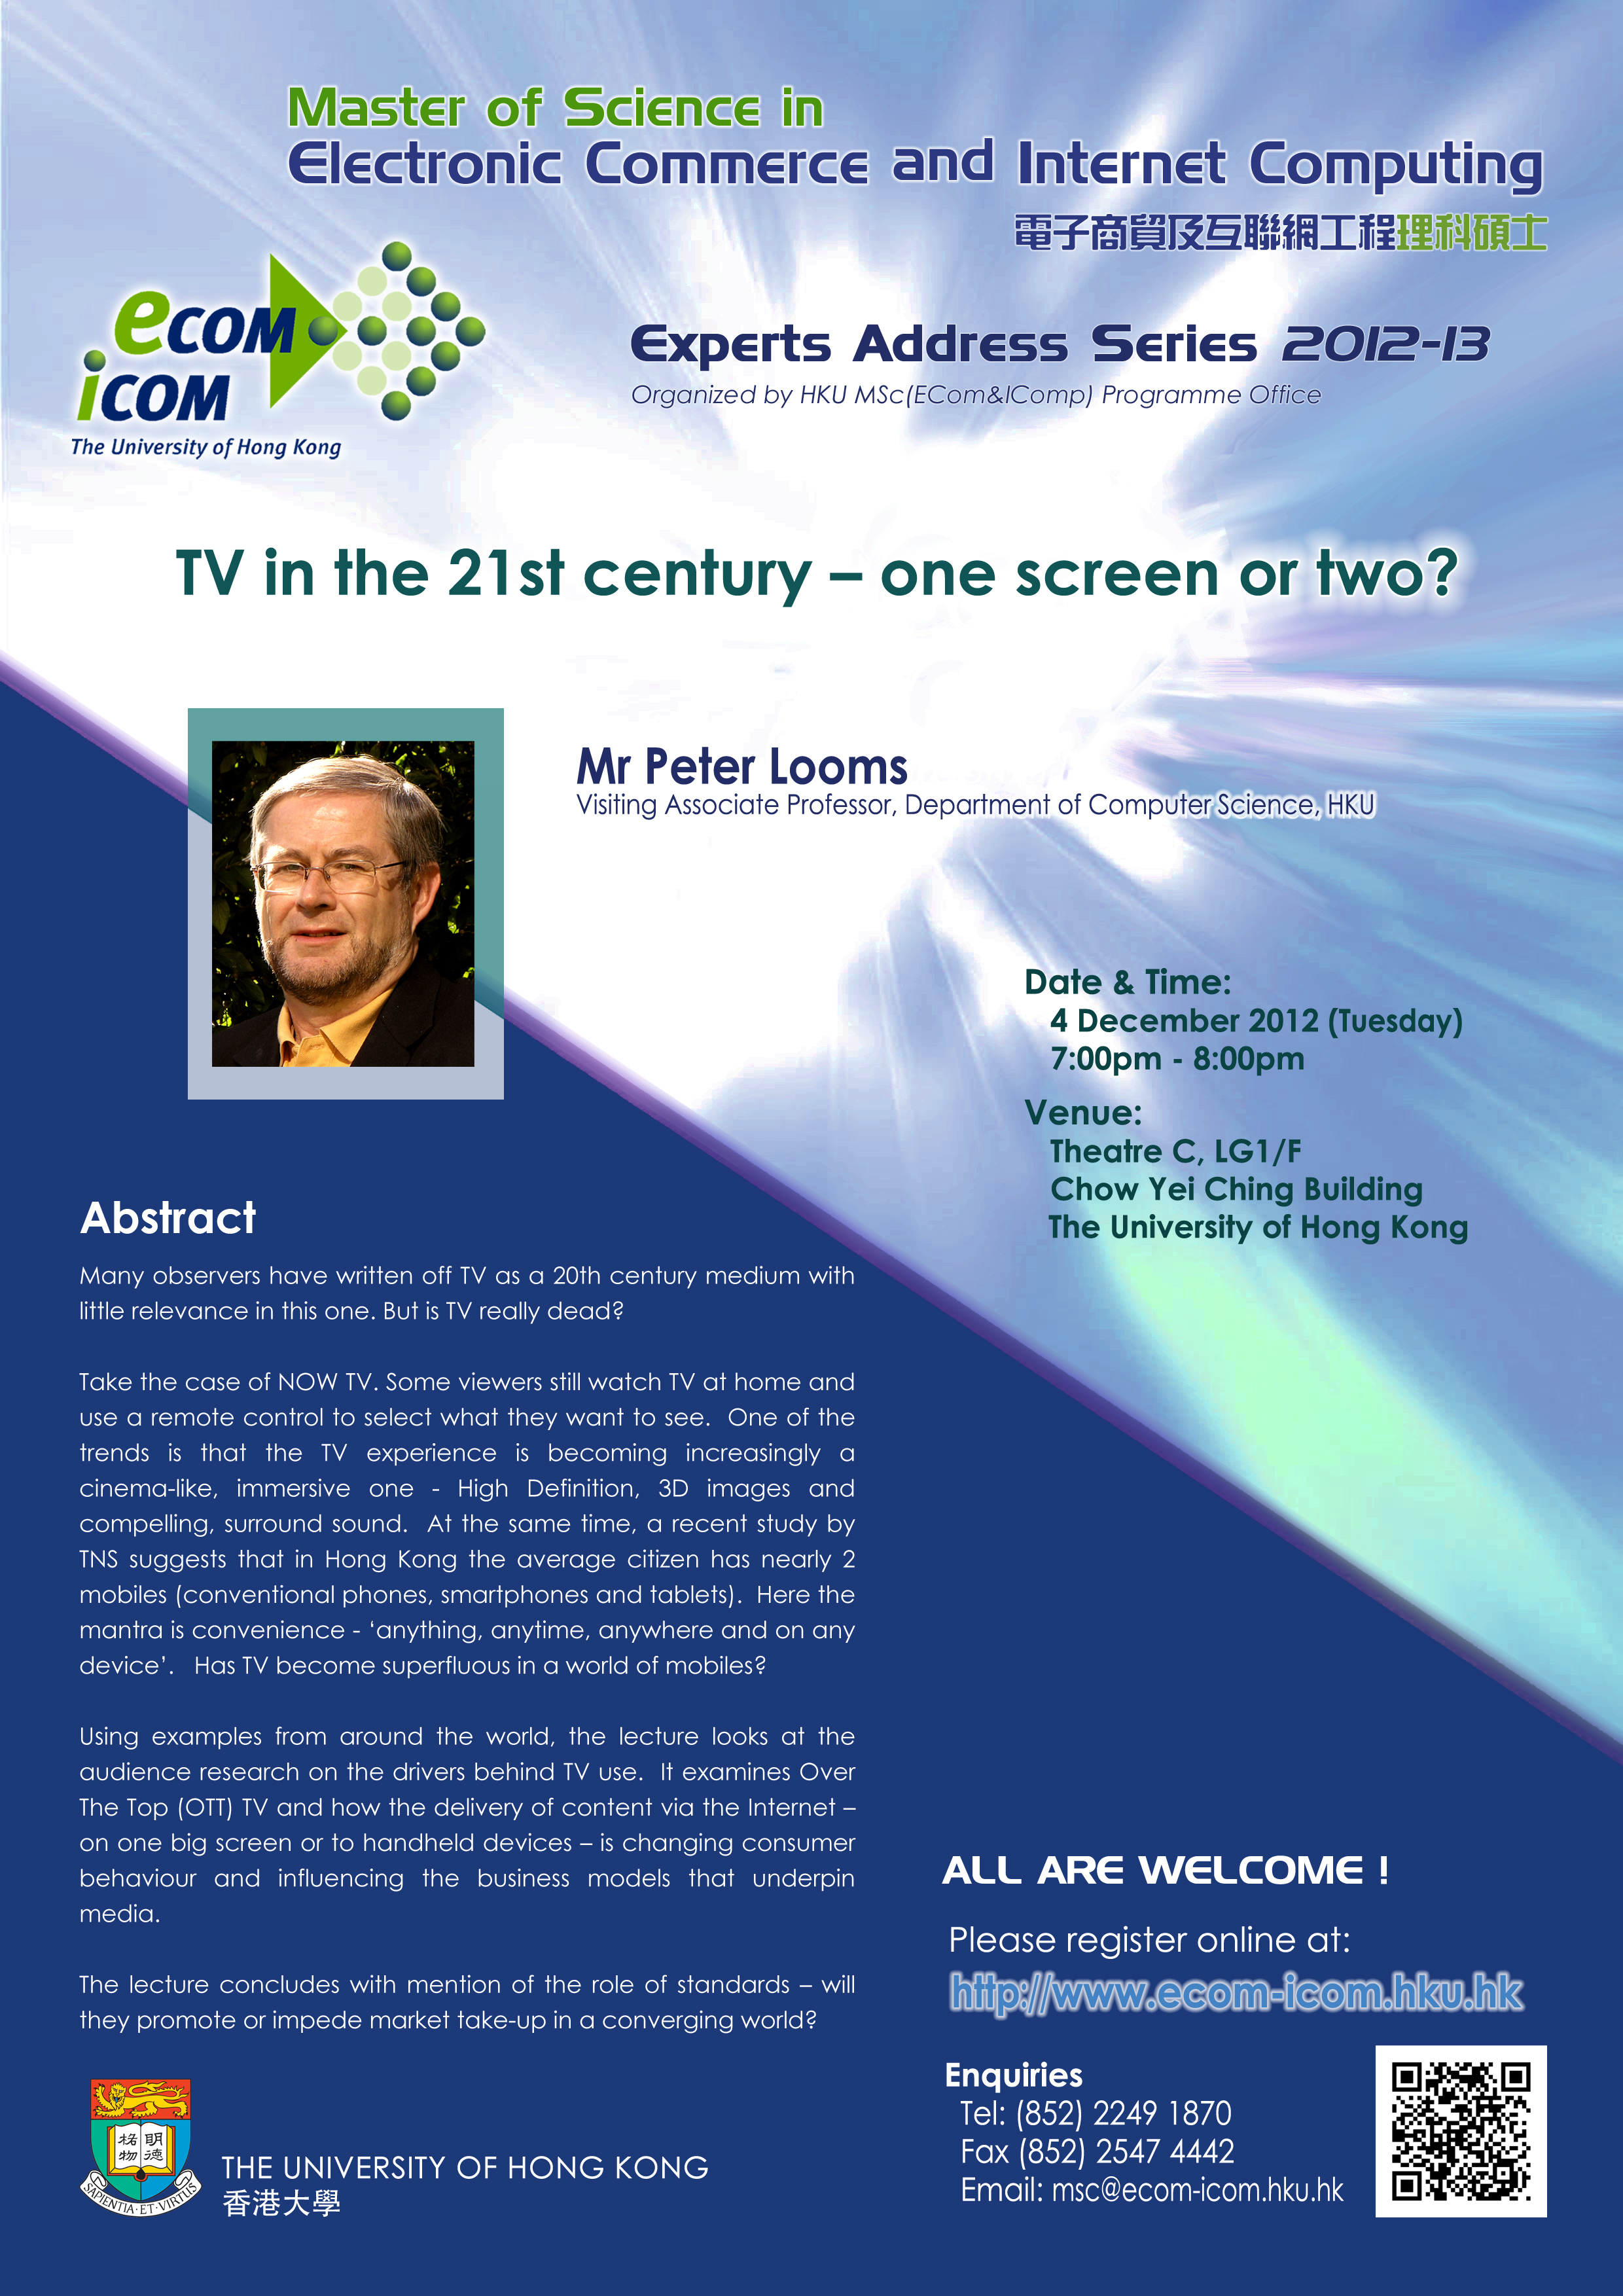 MSc(ECom&IComp) Experts Address: TV in the 21st century - one screen or two?